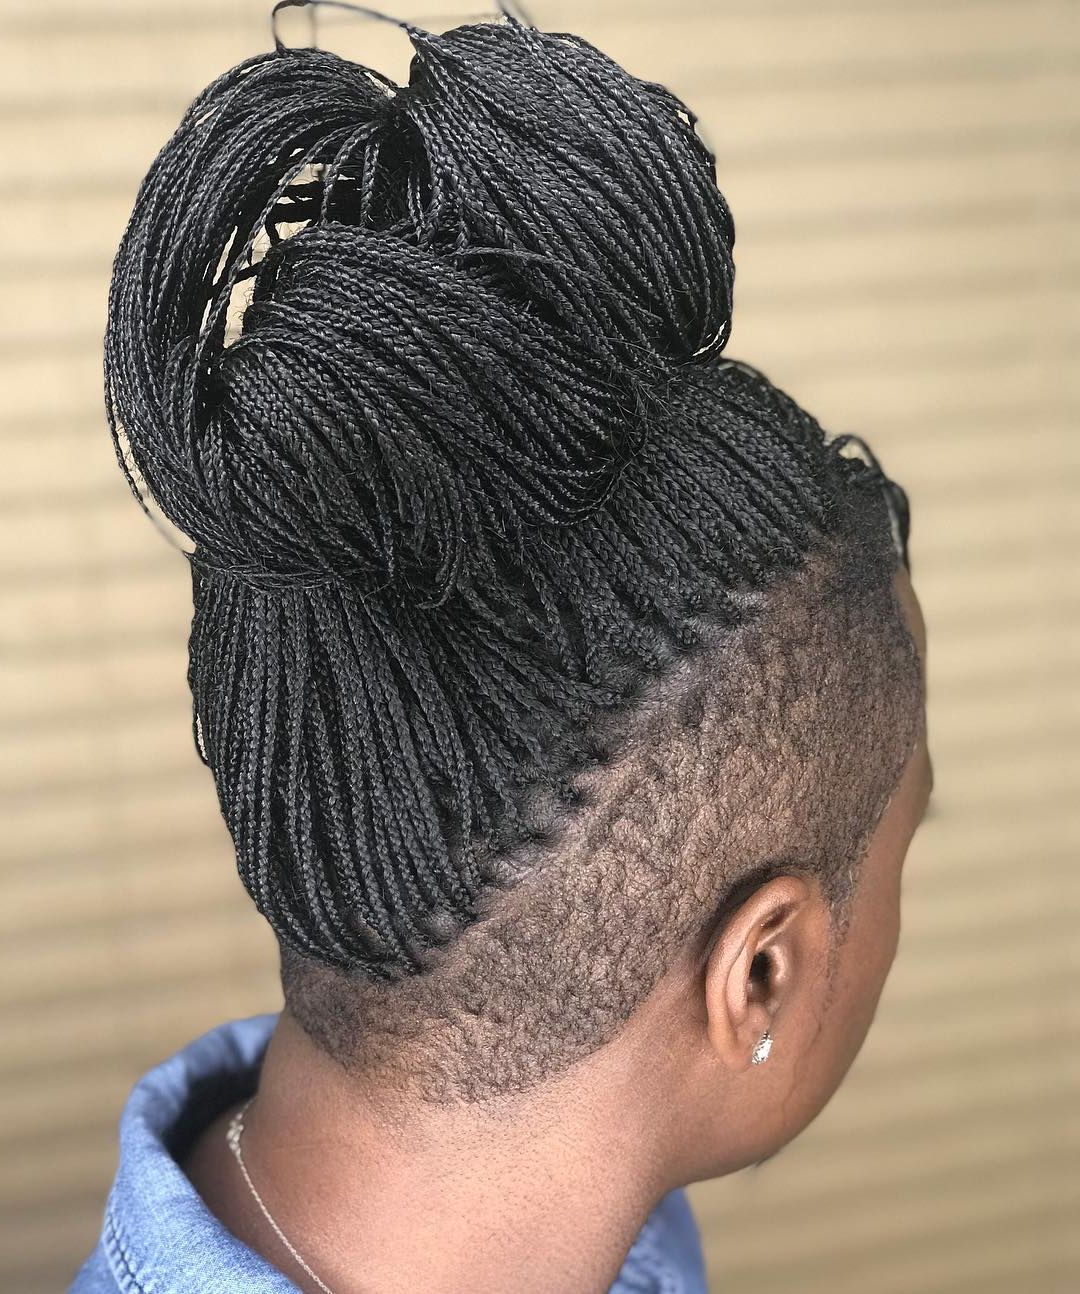 20 Superb Braids With Shaved Sides Worth Copying With Regard To Most Popular Tree Micro Braids With Side Undercut (View 4 of 20)